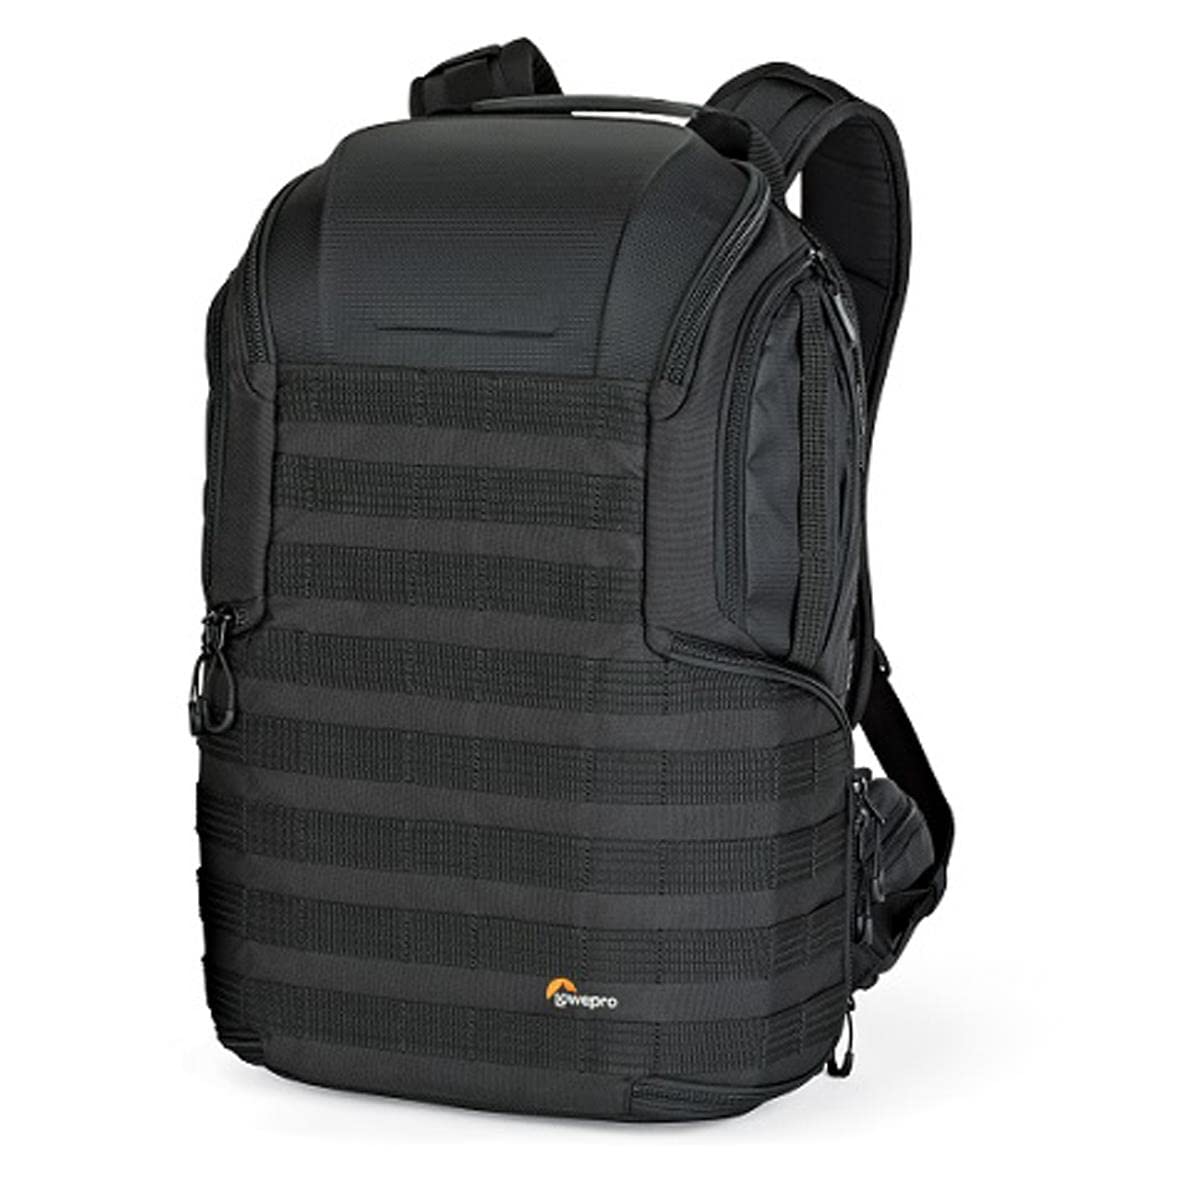 Lowepro ProTactic BP 450 AW II 25L Green Line Camera and Laptop Backpack, Black